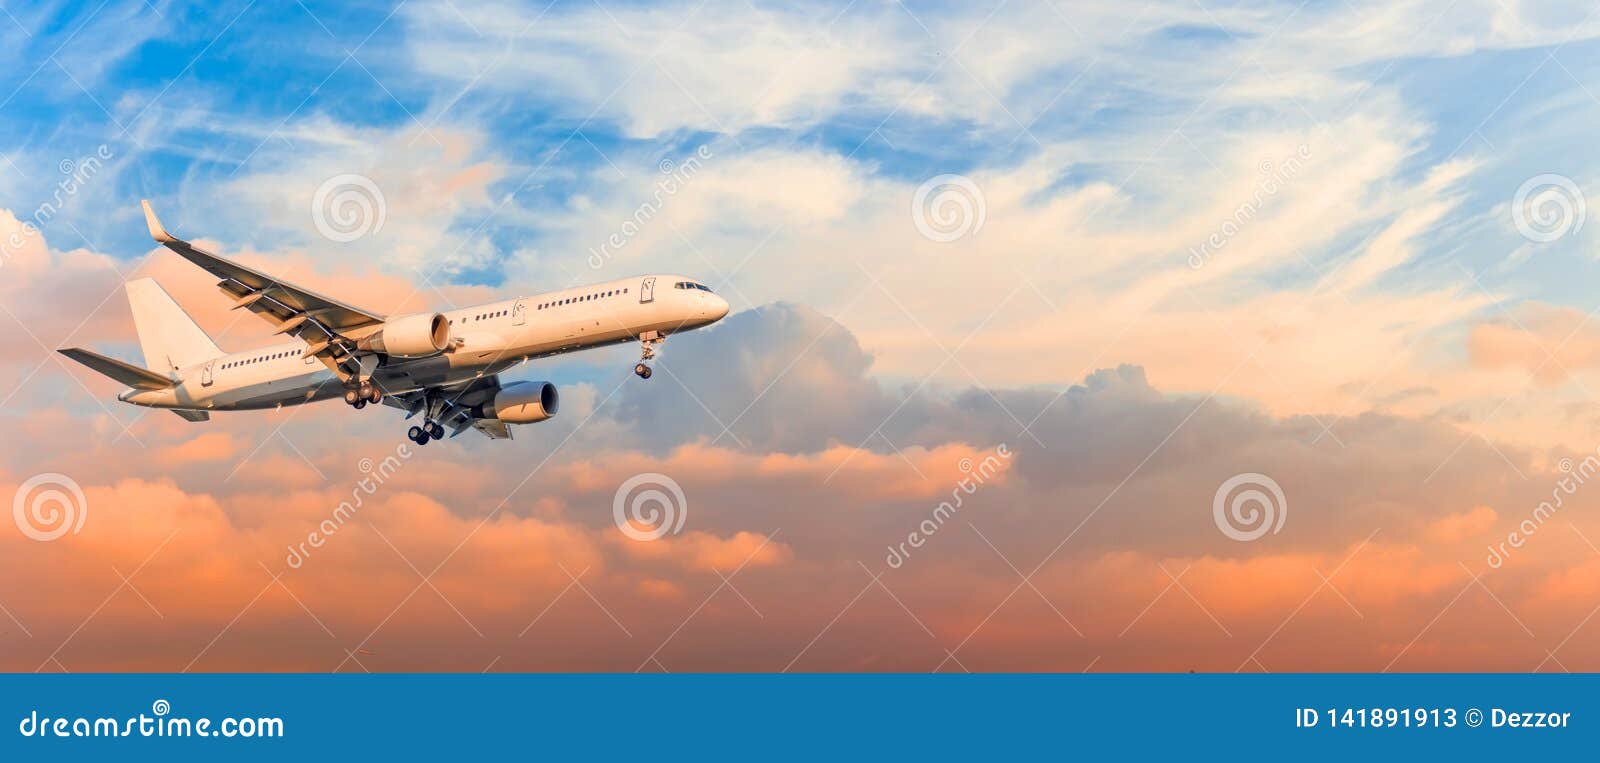 passenger airplane is landing approach gear released, against sunset sky clouds, panorama. travel aviation, flight, trip